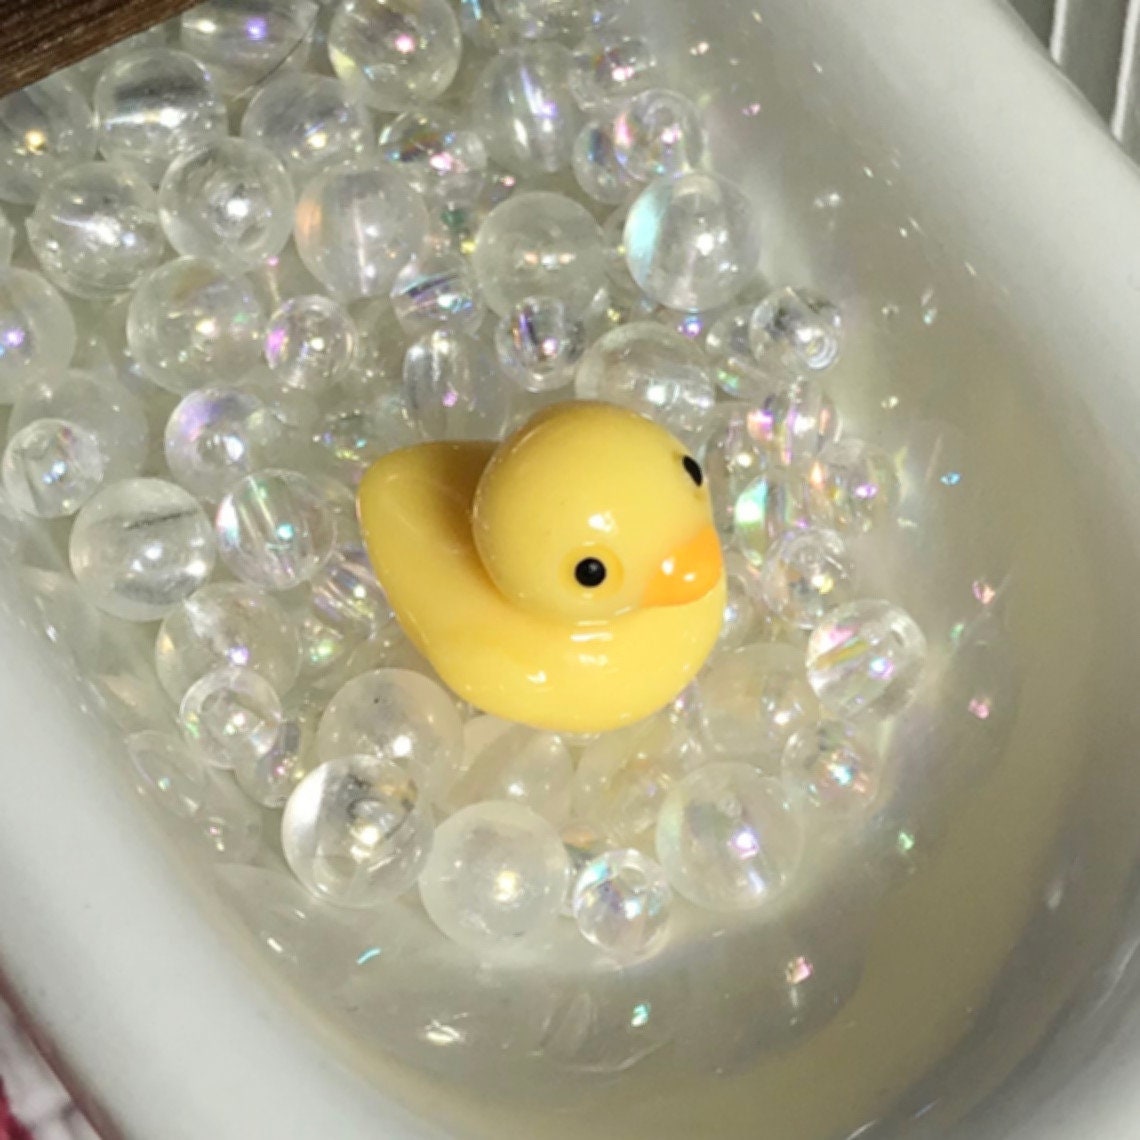 Dollhouse Miniature Bath Time Yellow “Rubber” Duckie Duck Ducky 1” scale 1:12 